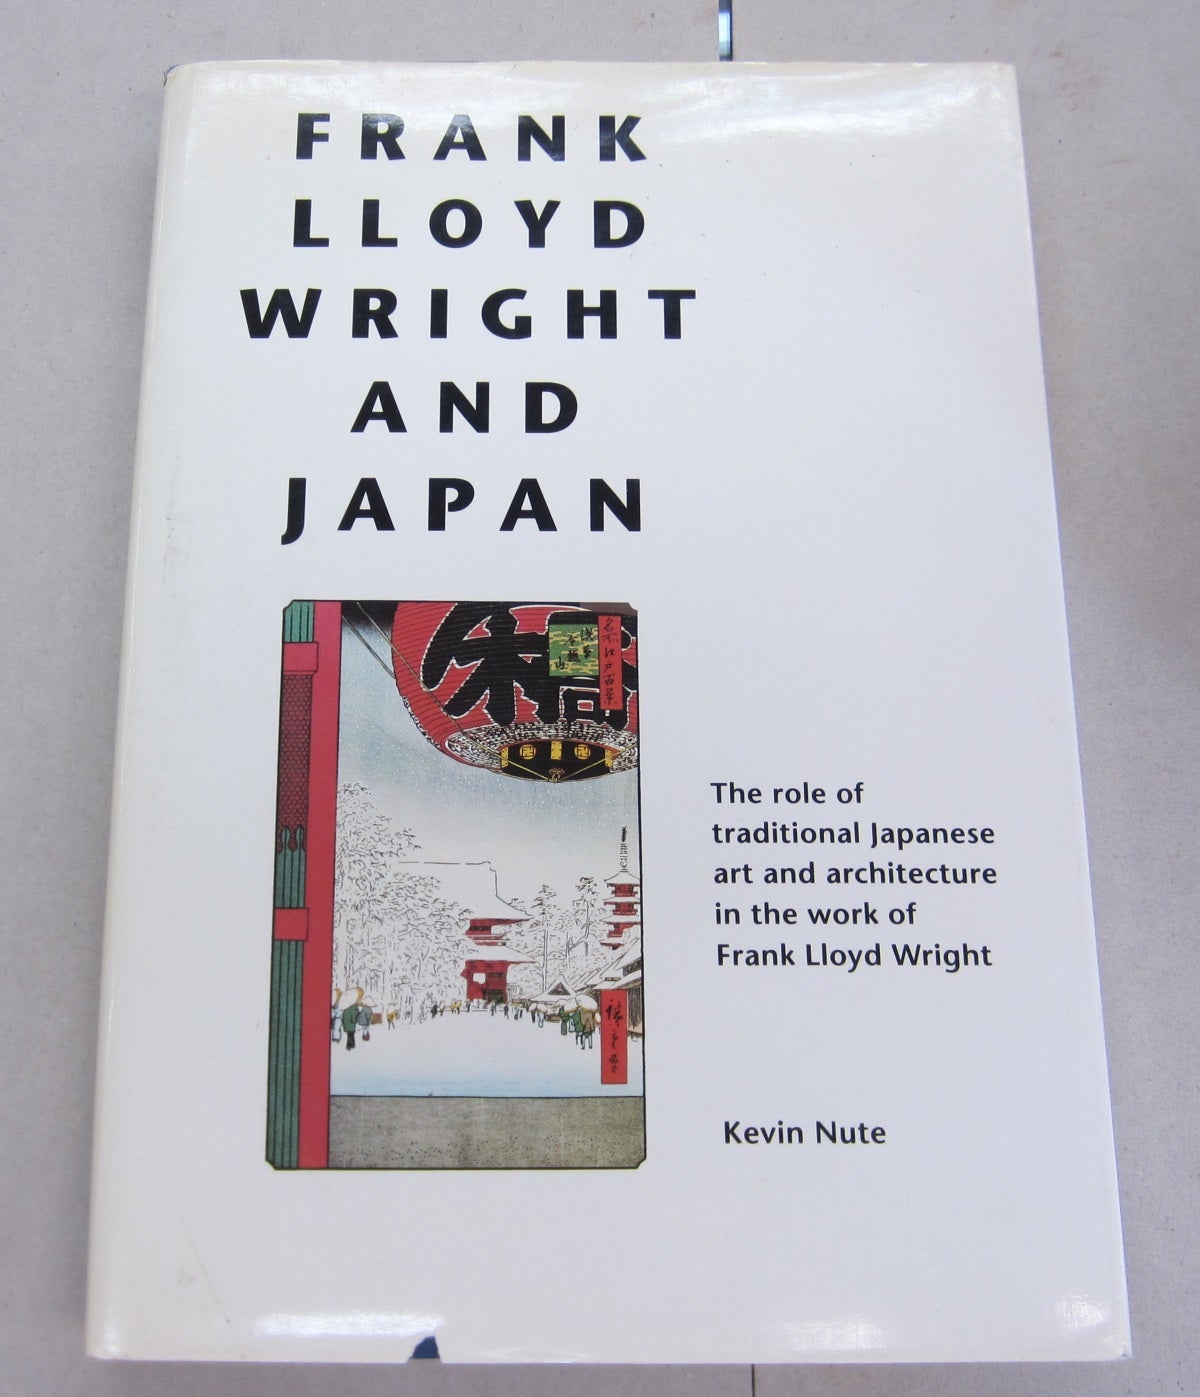 Traditional　First　in　Japanese　Frank　and　Wright　the　Architecture　of　of　edition　Frank　Wright　Lloyd　Work　Japan:　Role　and　The　Art　Nute　Lloyd　Kevin